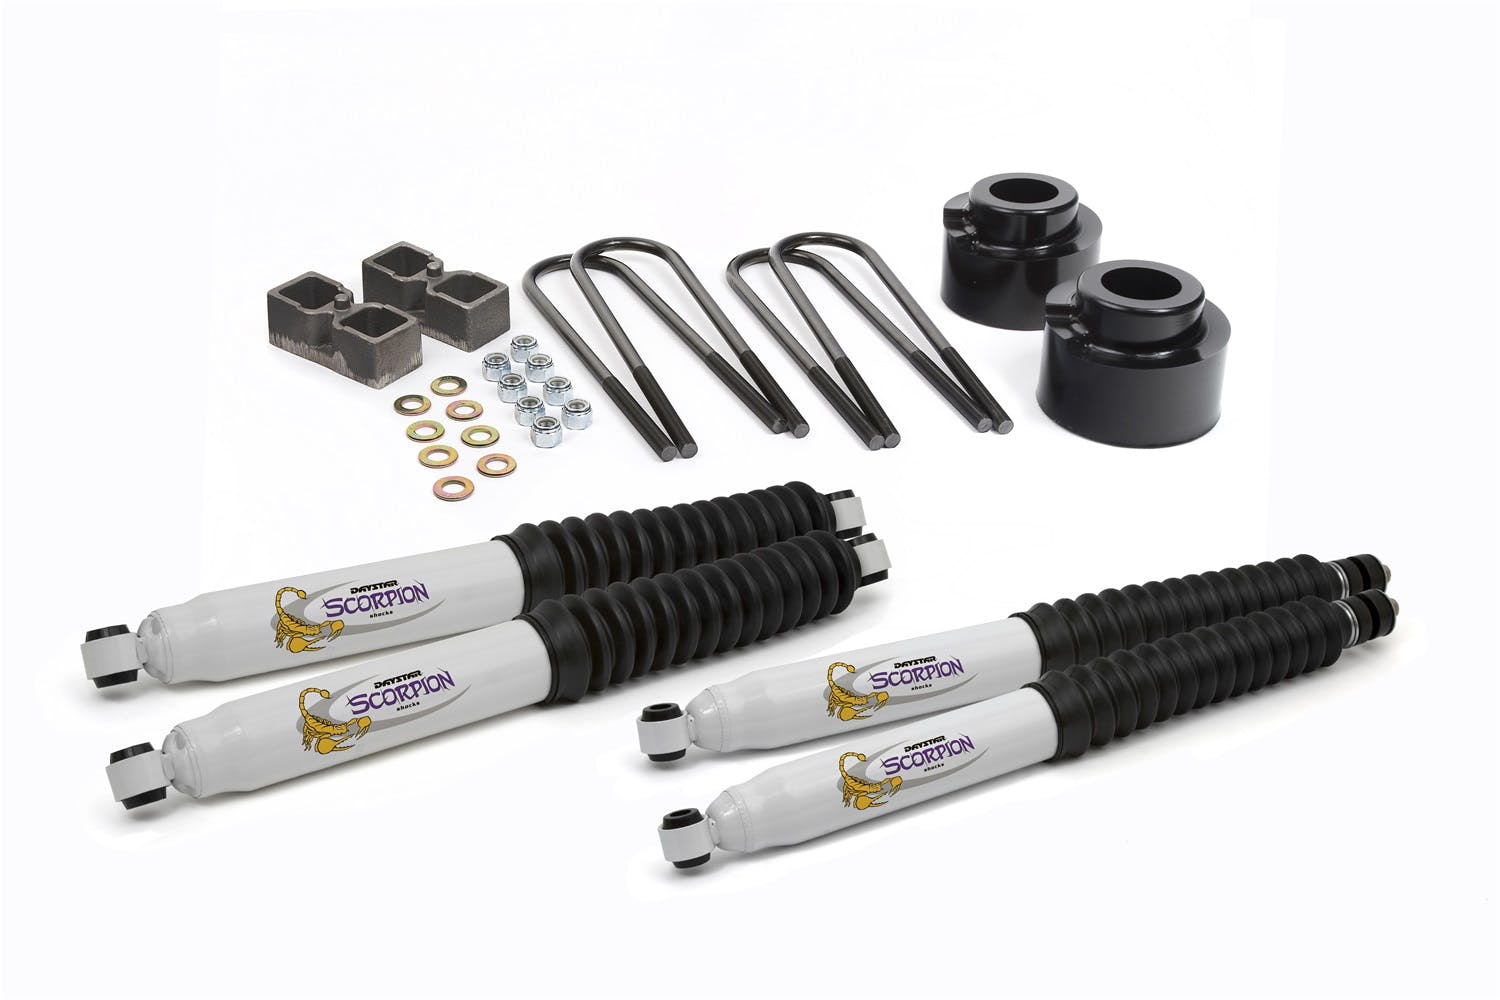 Daystar KF09051BK Suspension Lift Kit; 2.5 inch Front Coil Spring Spacers; 2 inch Rear Lift Blocks